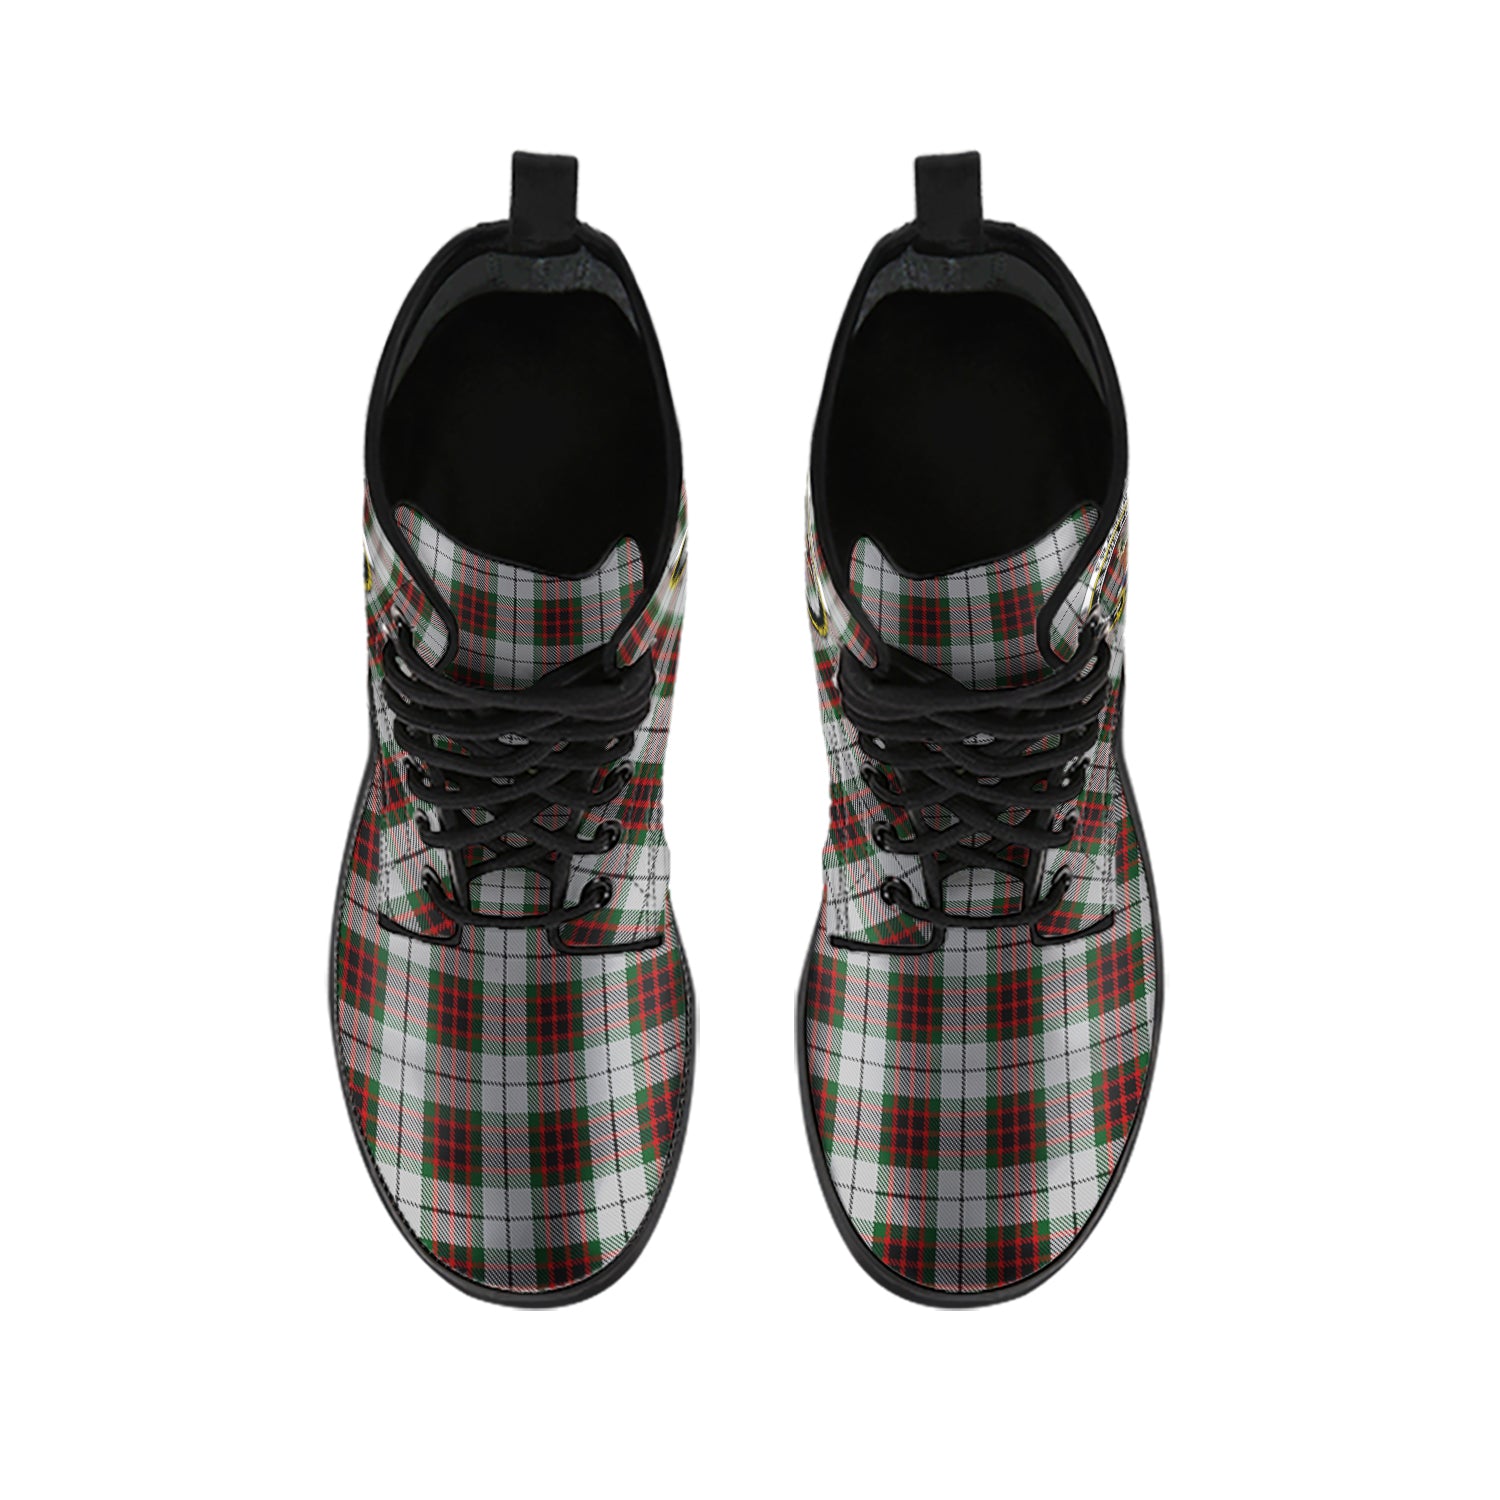 fraser-dress-tartan-leather-boots-with-family-crest